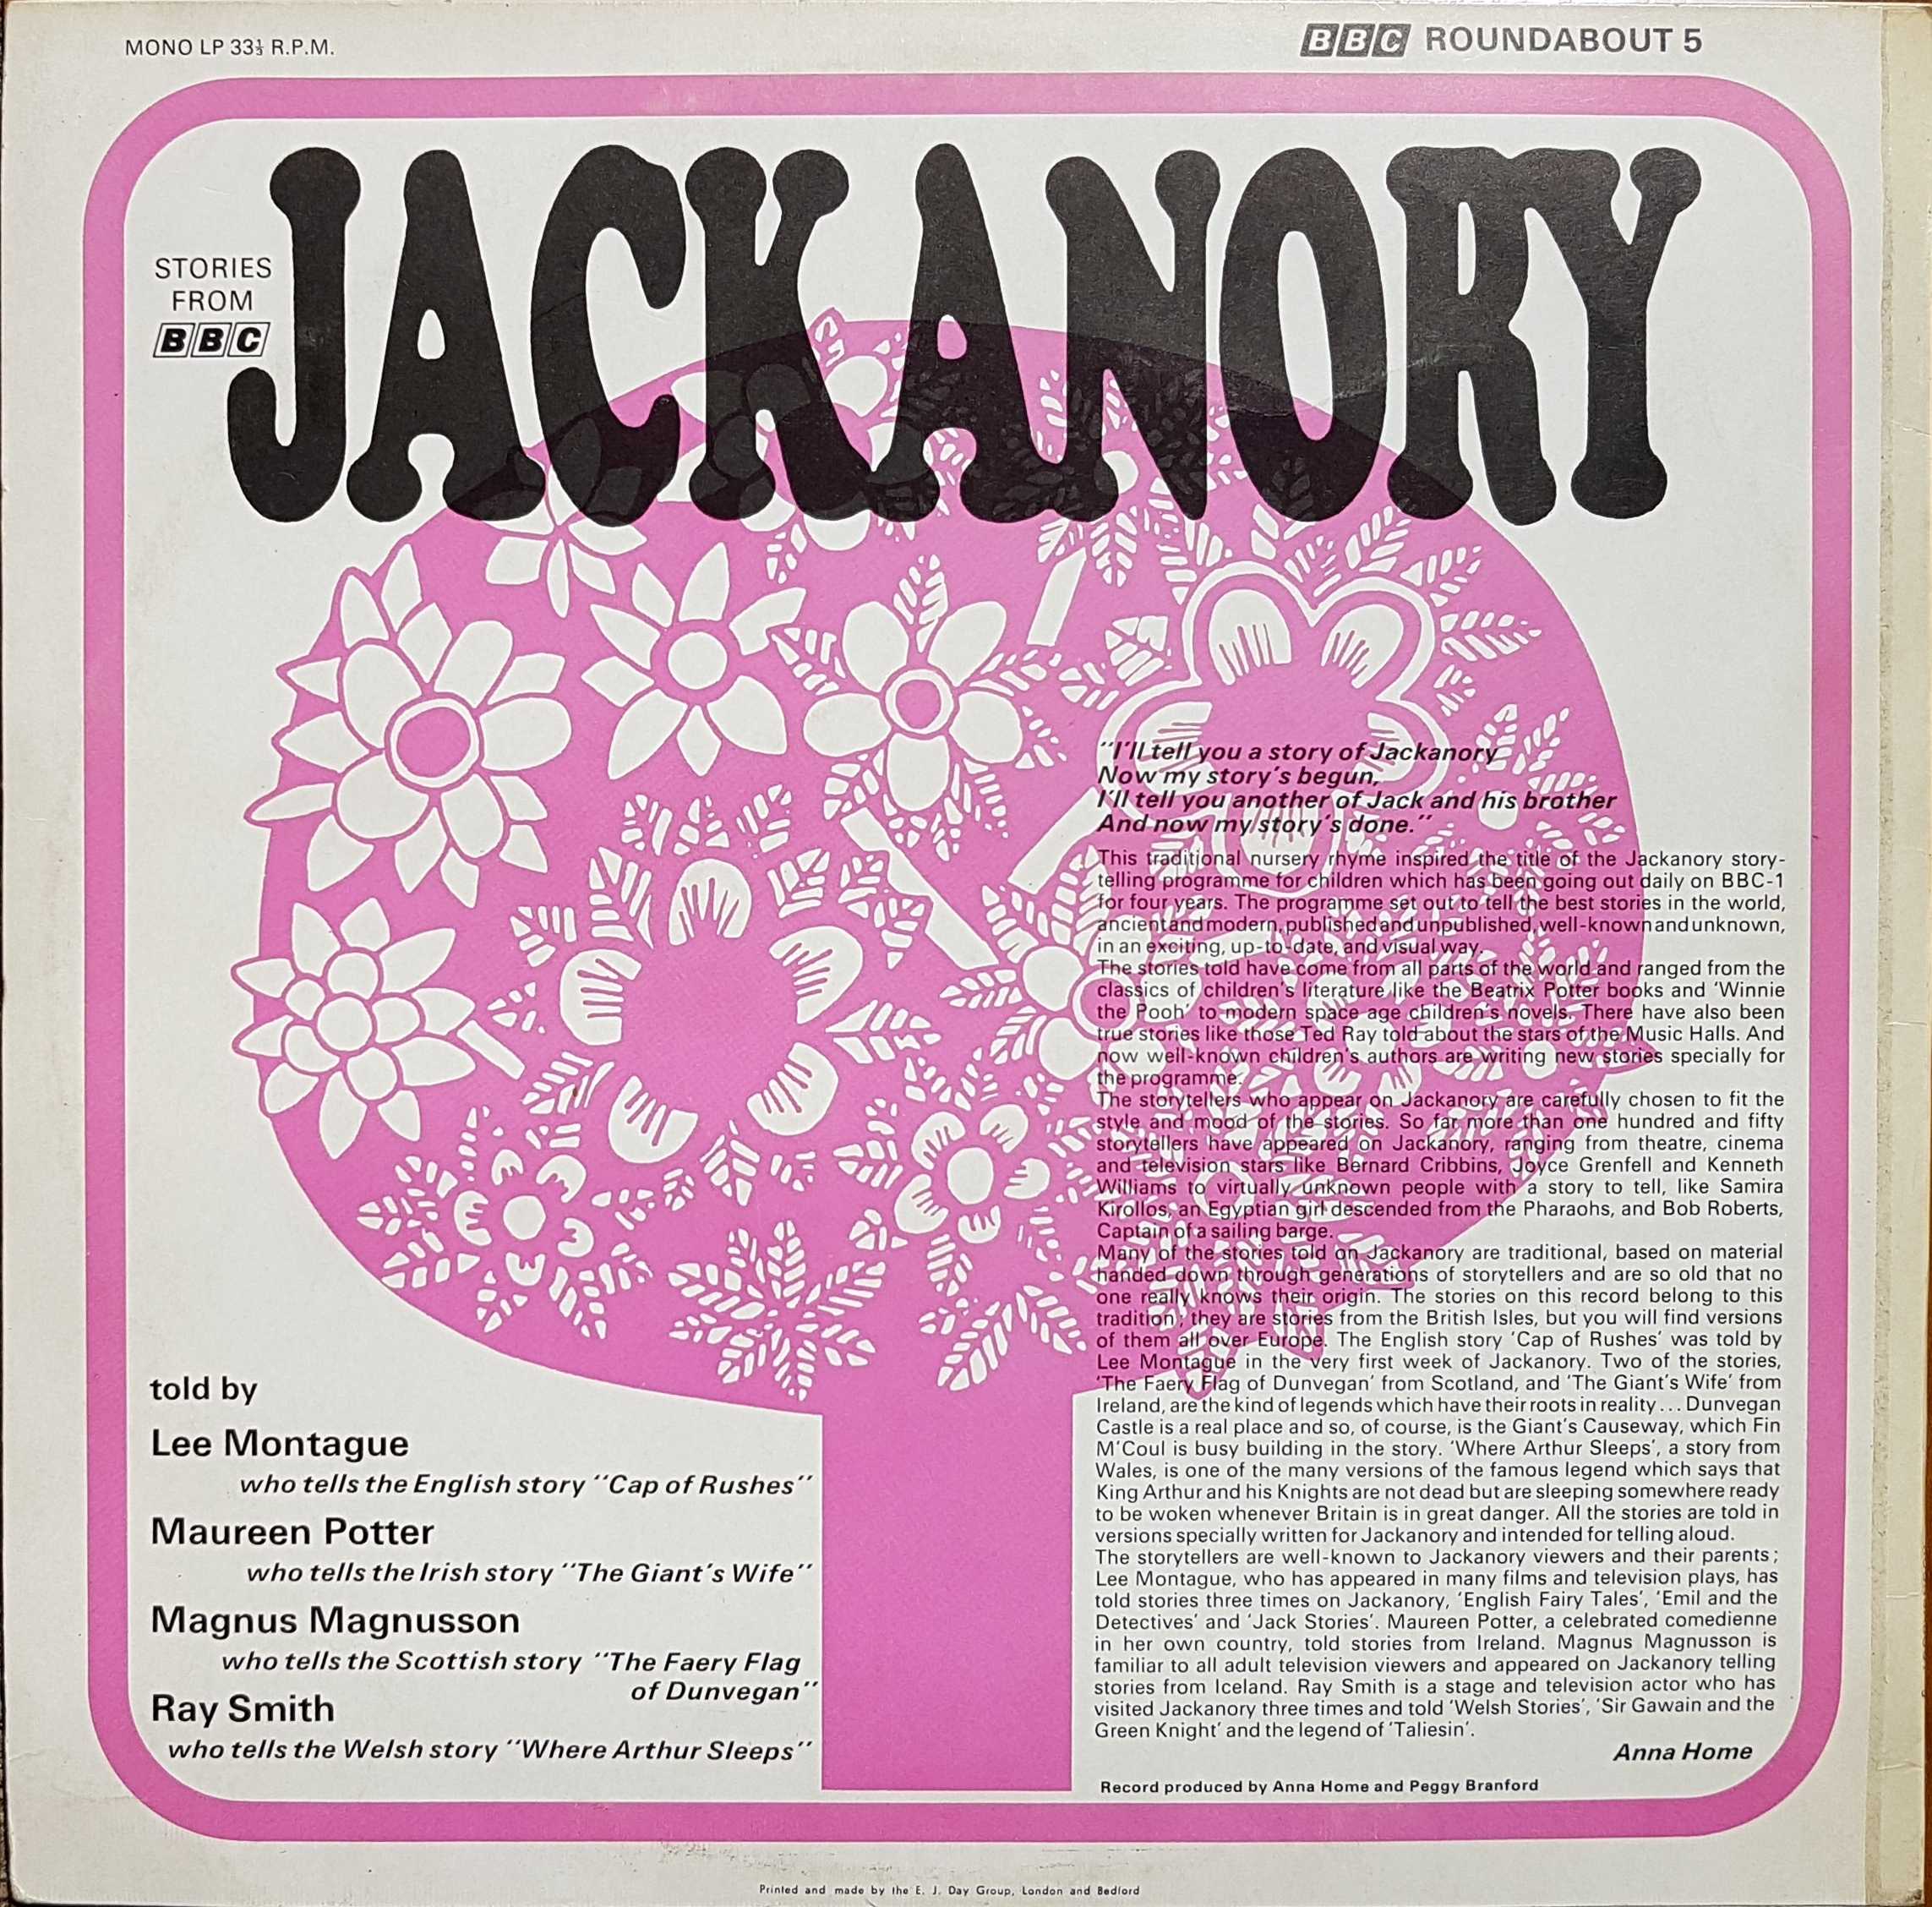 Picture of RBT 5 Jackanory by artist Lee Montague / Maureen Potter / Magnus Magnusson / Ray Smith from the BBC records and Tapes library